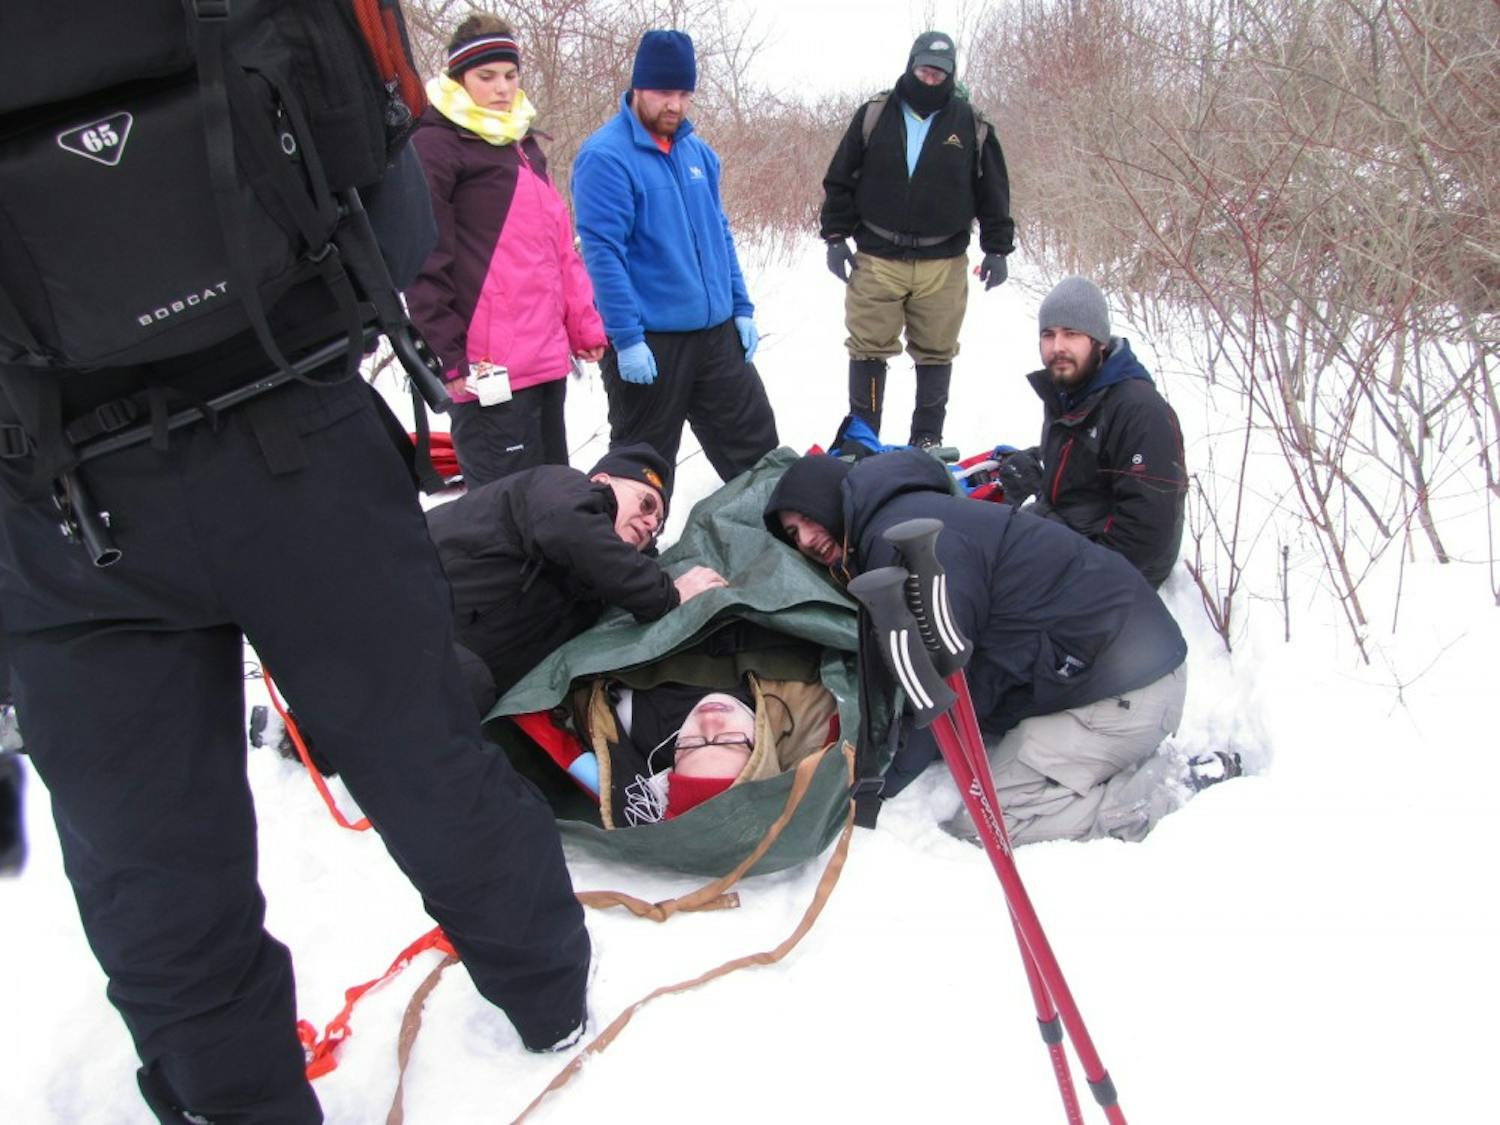 Vanessa Dwyer, a sophomore environmental geosciences major; Andrew Harp, a PhD student in geology; Chris Portor of CDS Outdoor Inc.; and Kevin Sauta, a senior environmental geosciences major look on as Mike Mazuitowski and Max Bass, a junior social sciences interdisciplinary major participate in a drill on an Outdoor Pursuits trip in which they evacuate a "victim."